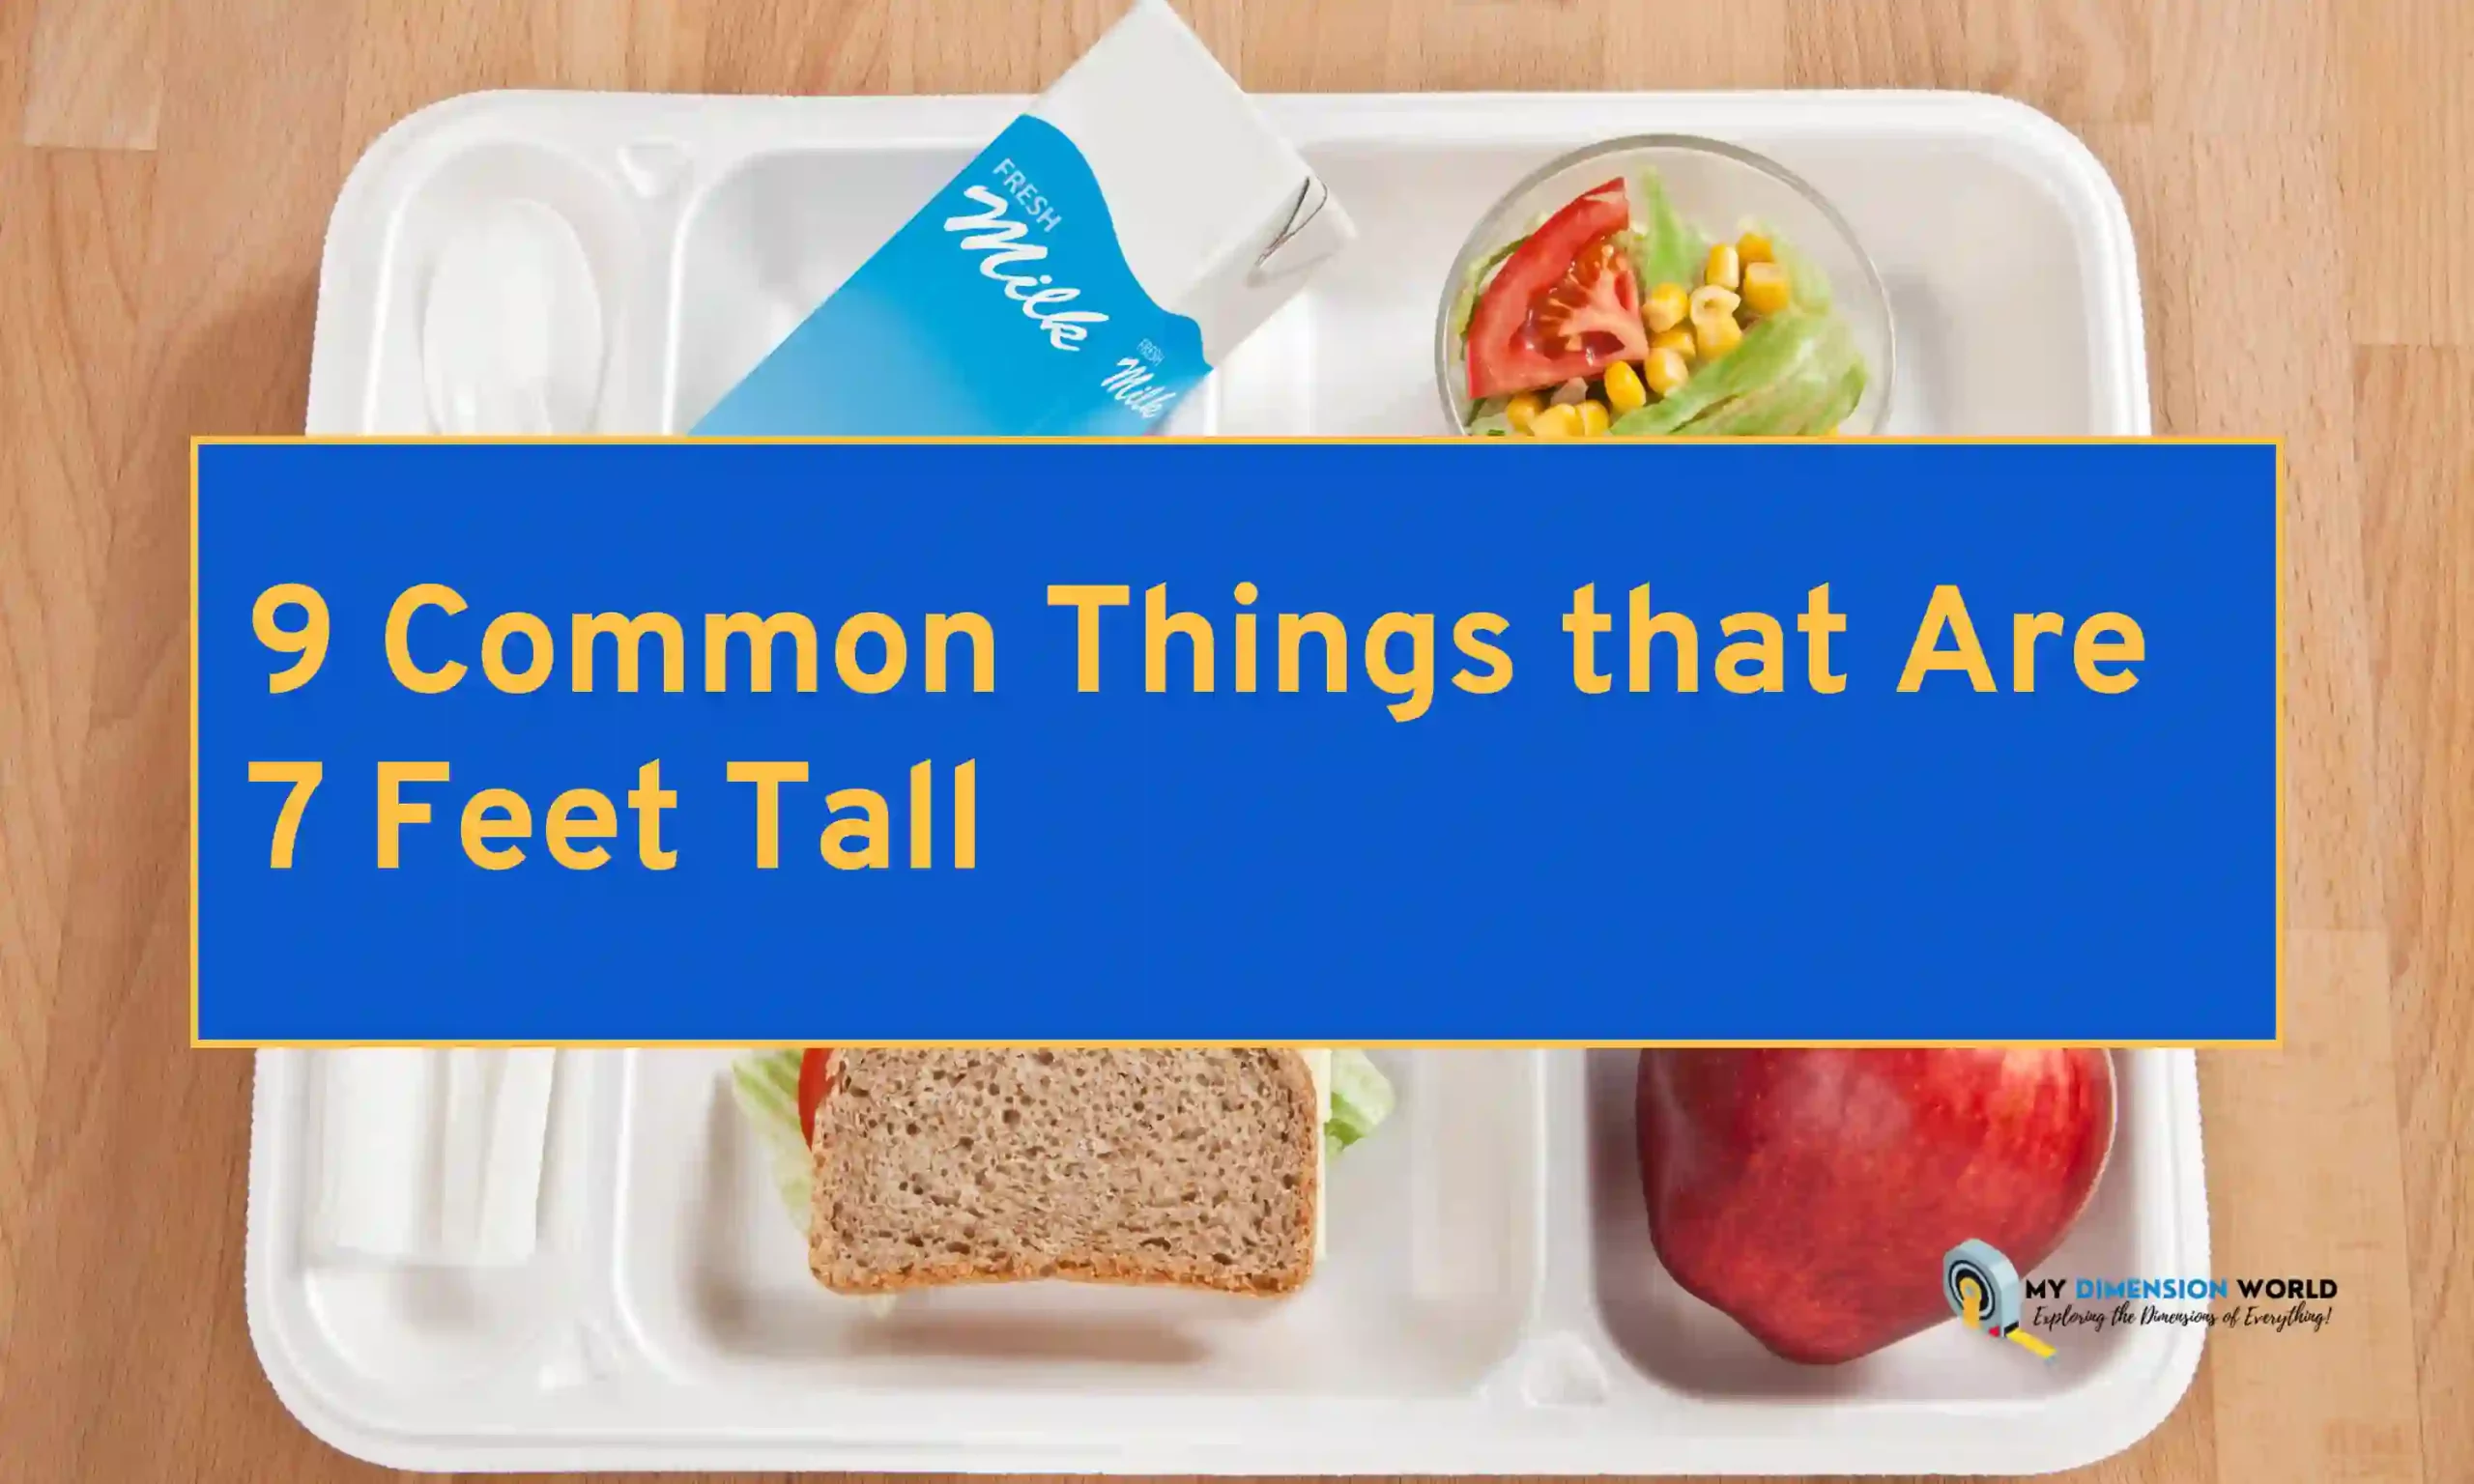 9 Common Things that Are 7 Feet Tall